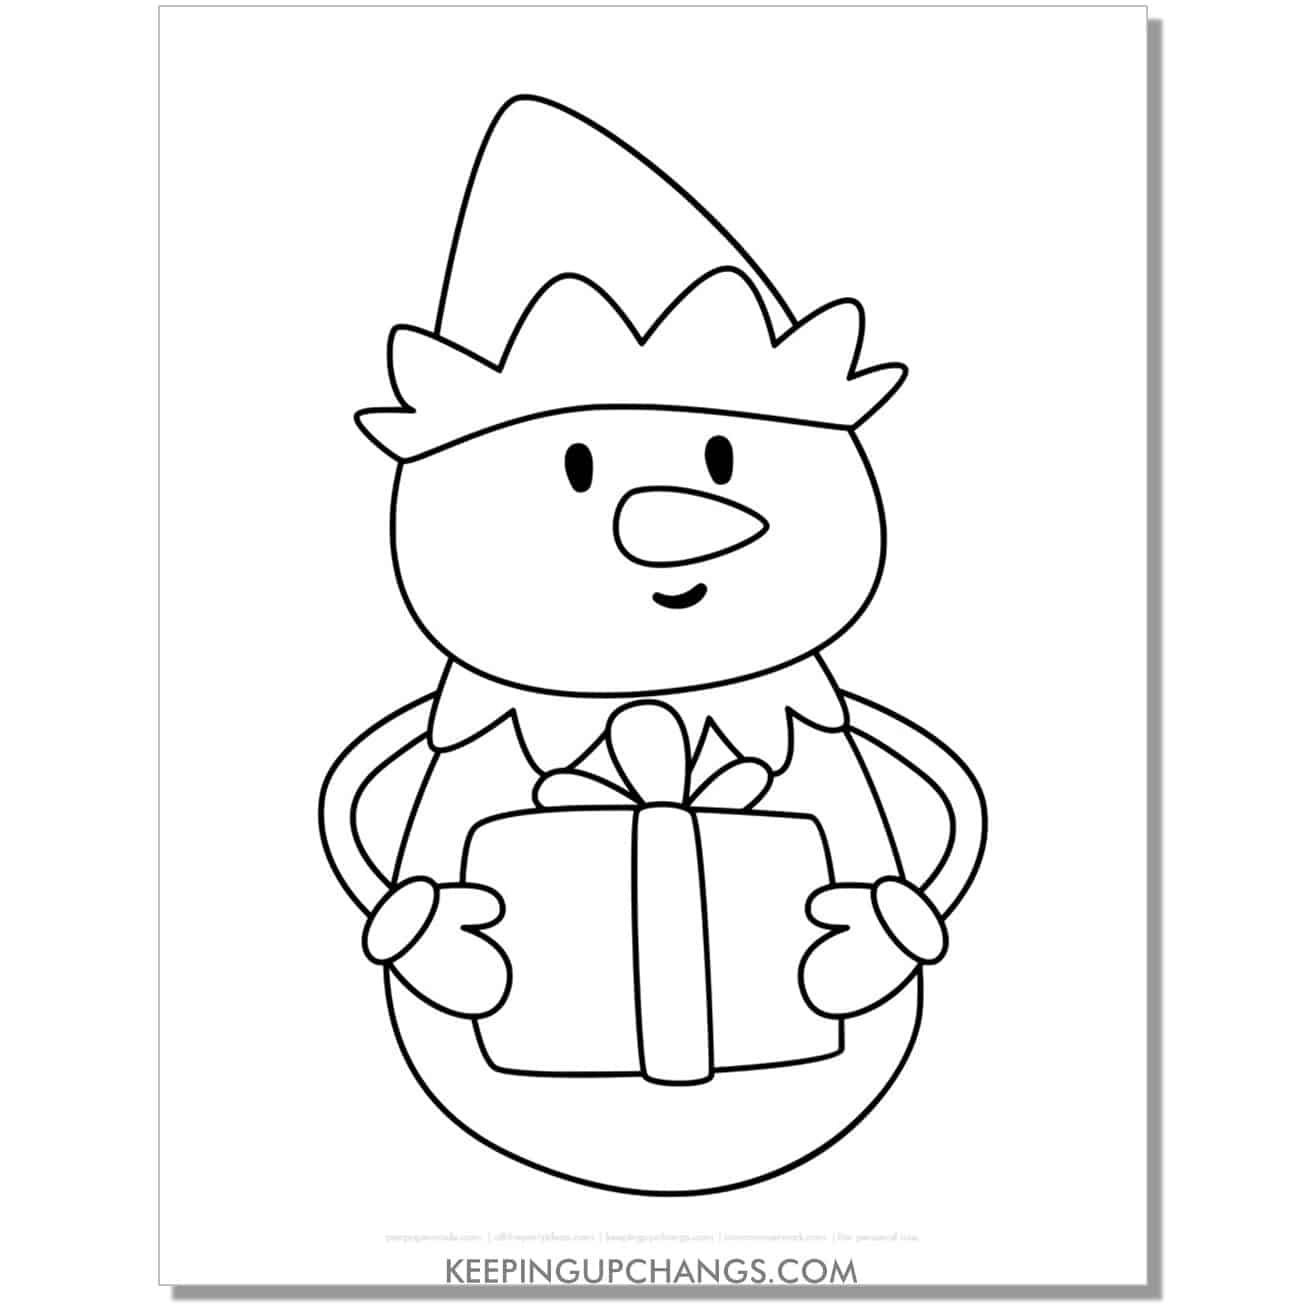 free simple snowman with elf hat coloring page.